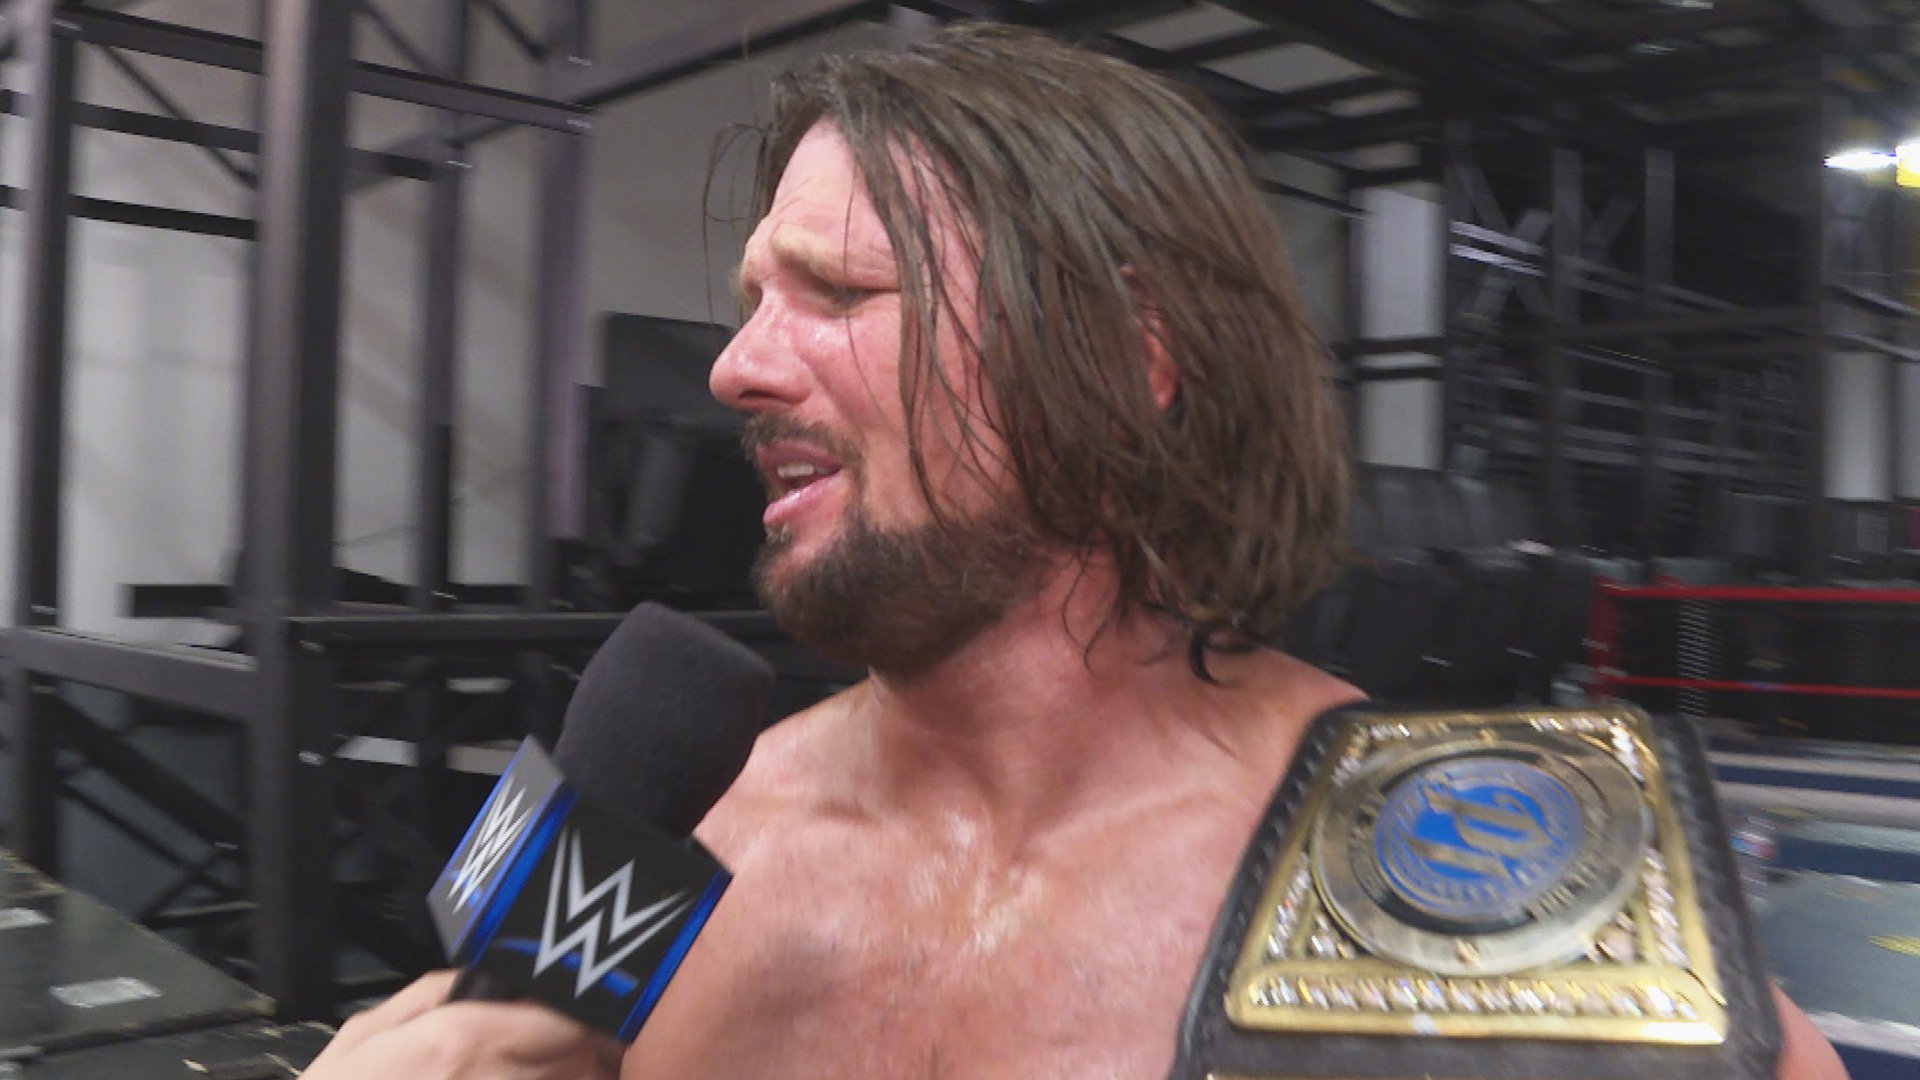 AJ Styles Delivers A Championship Motto To Remember WWEcom